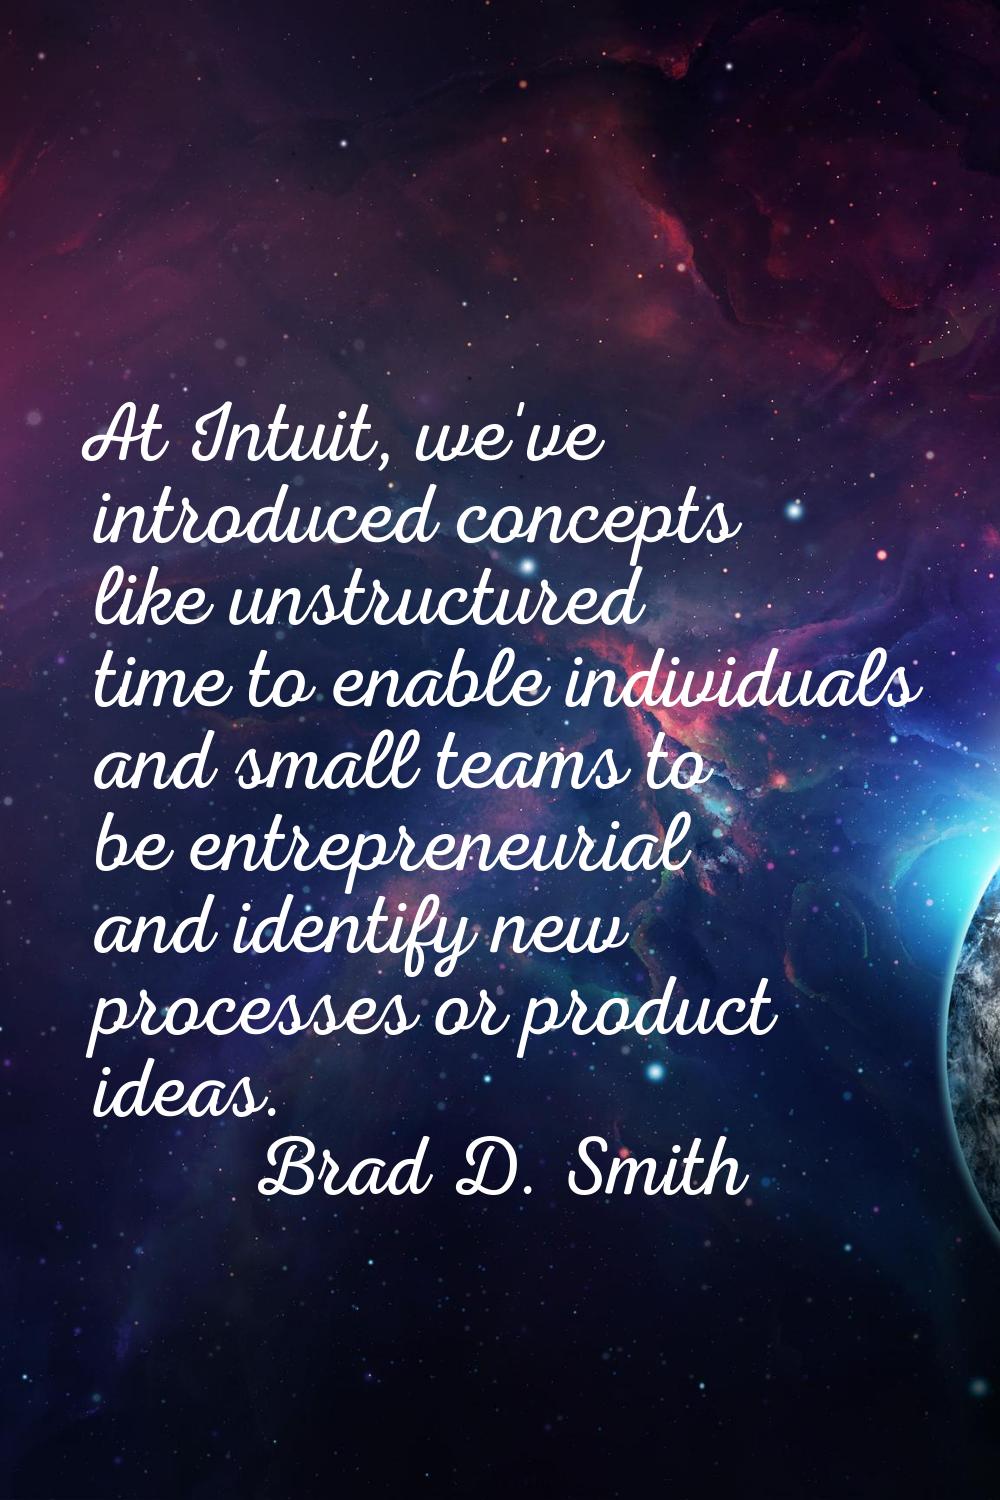 At Intuit, we've introduced concepts like unstructured time to enable individuals and small teams t